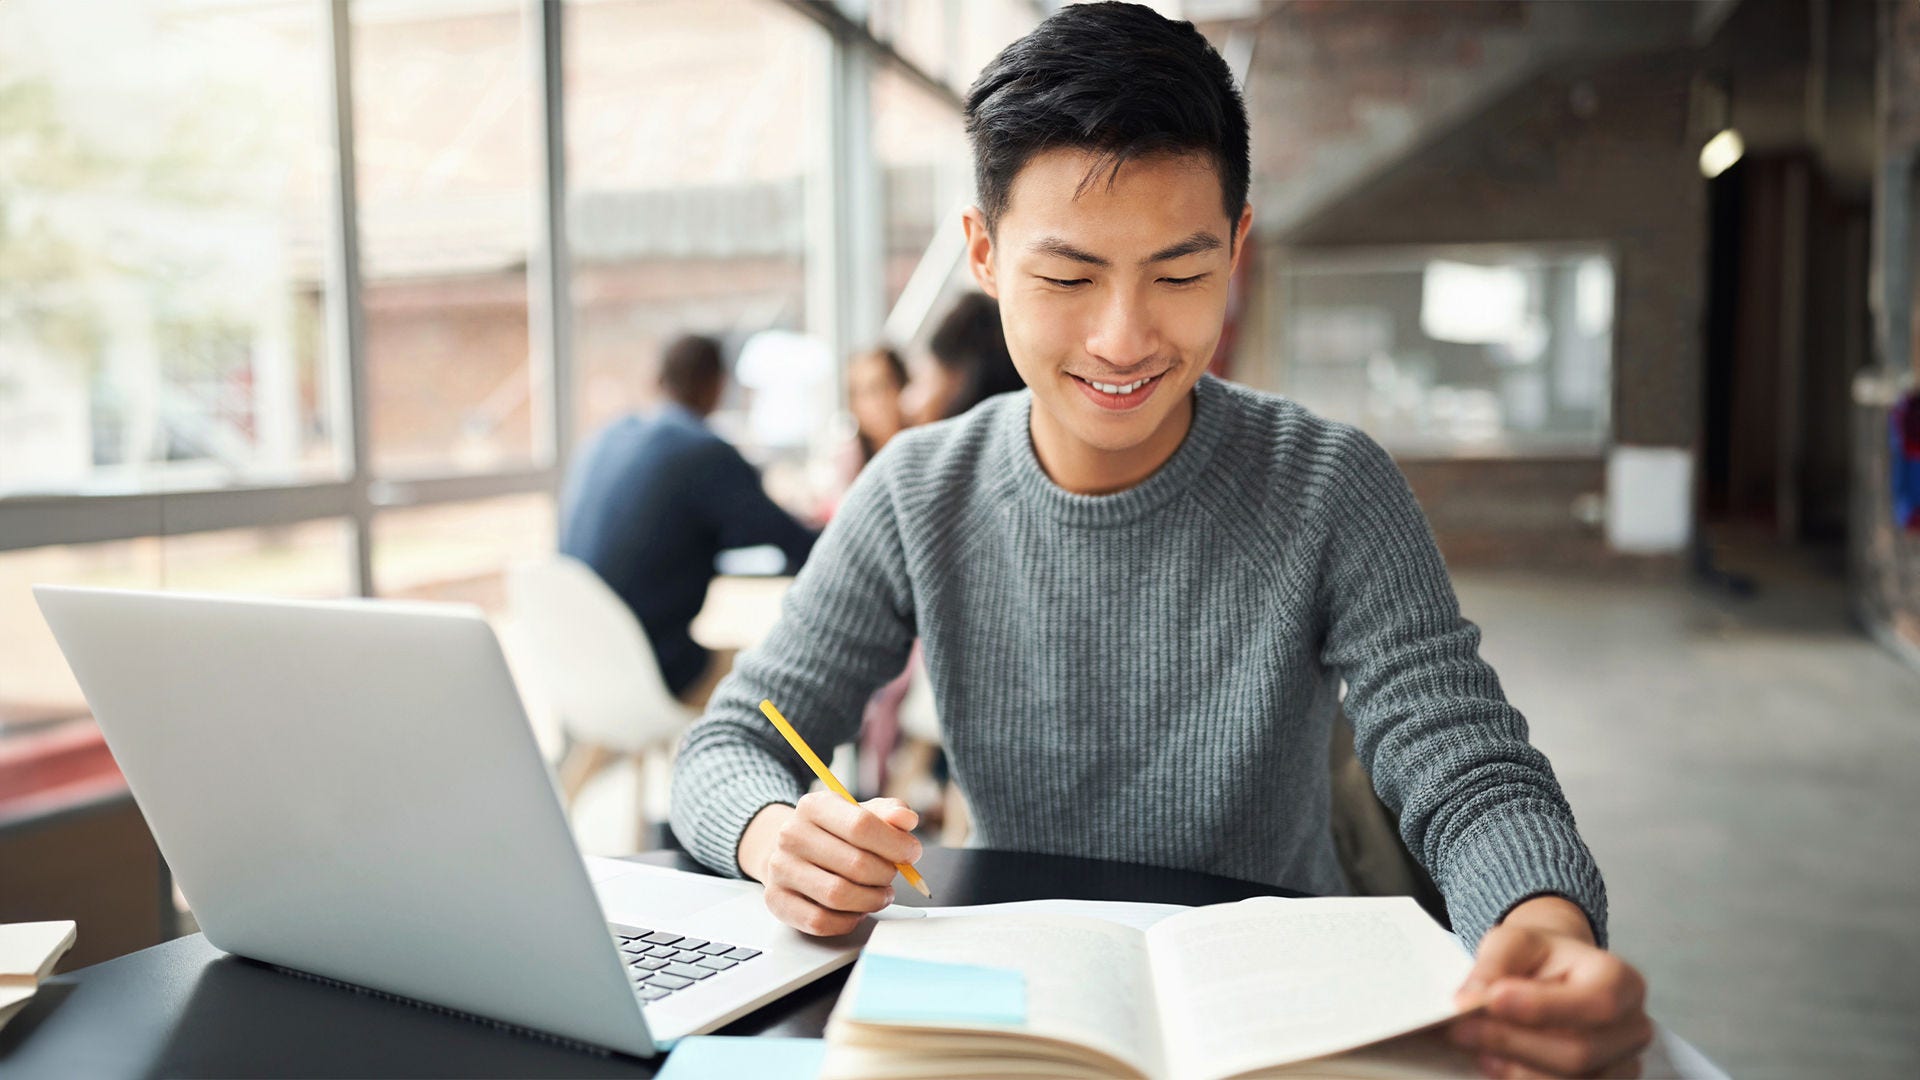 man studying with book and laptop, holding pencil smiling